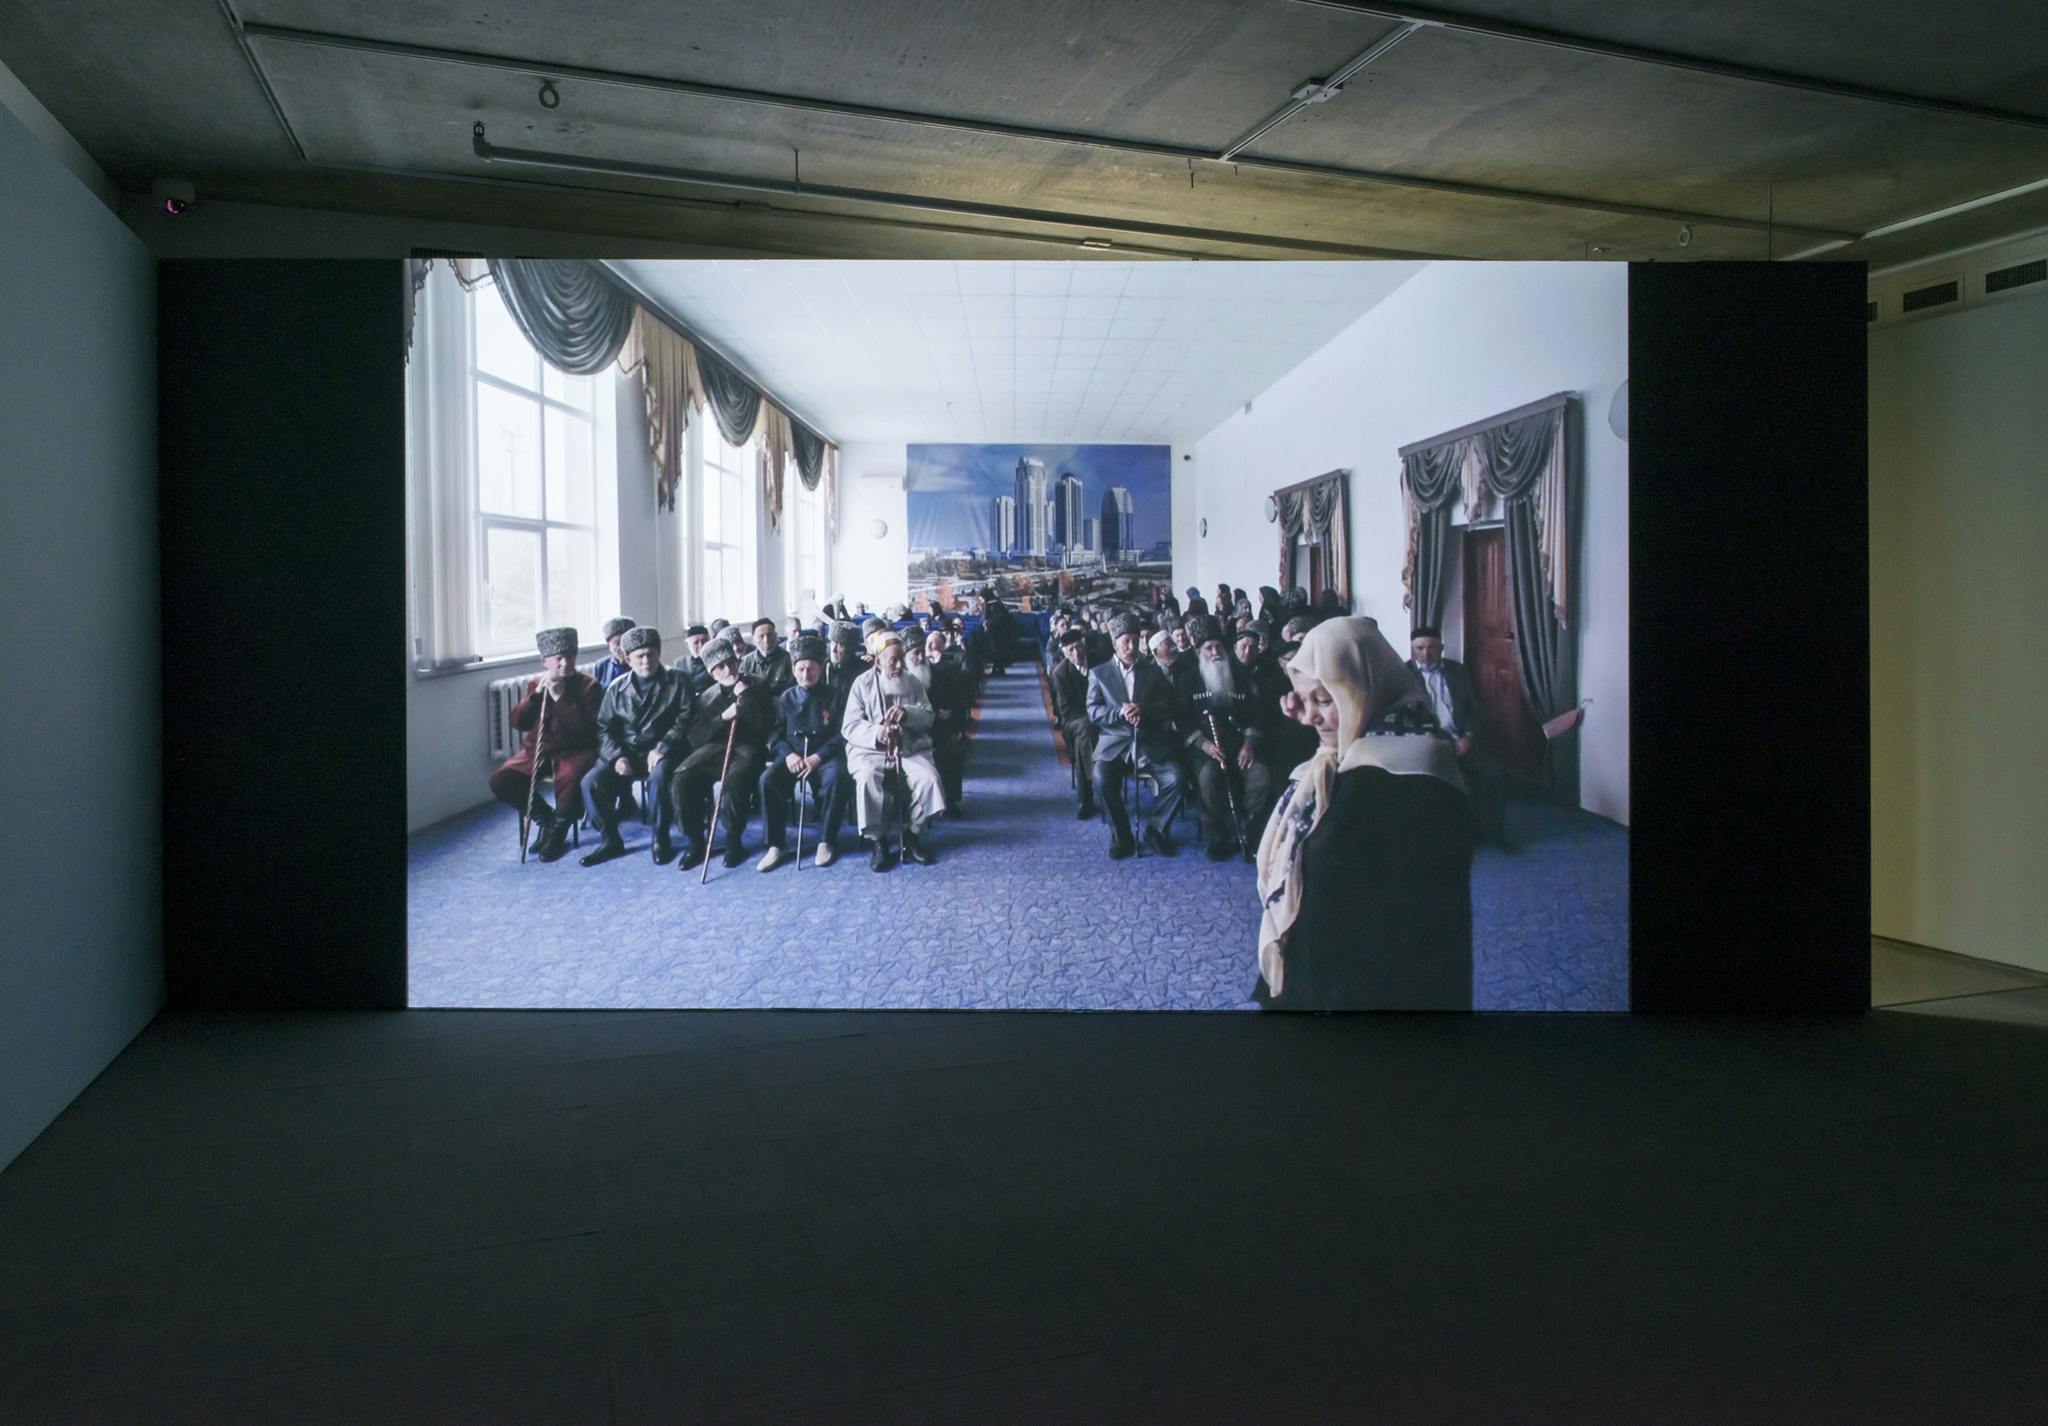 A large screen is displayed in a dark gallery. On the screen, a group of people sit facing the front of a large room. A person stands at the front of the room with their face turned away.